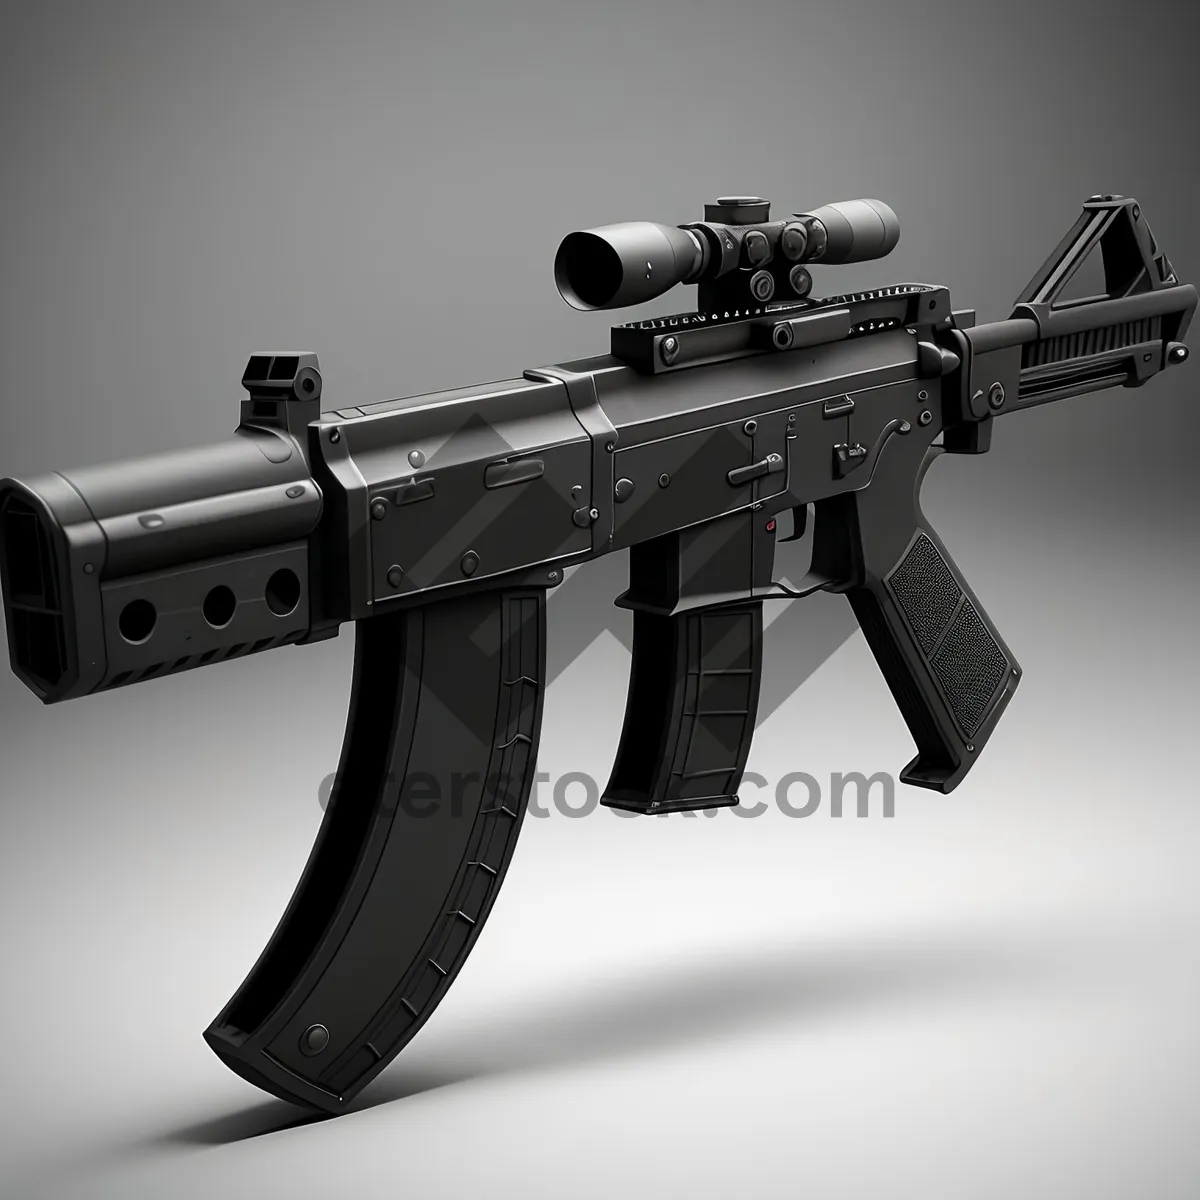 Picture of Advanced Automatic Rifle for Military Combat